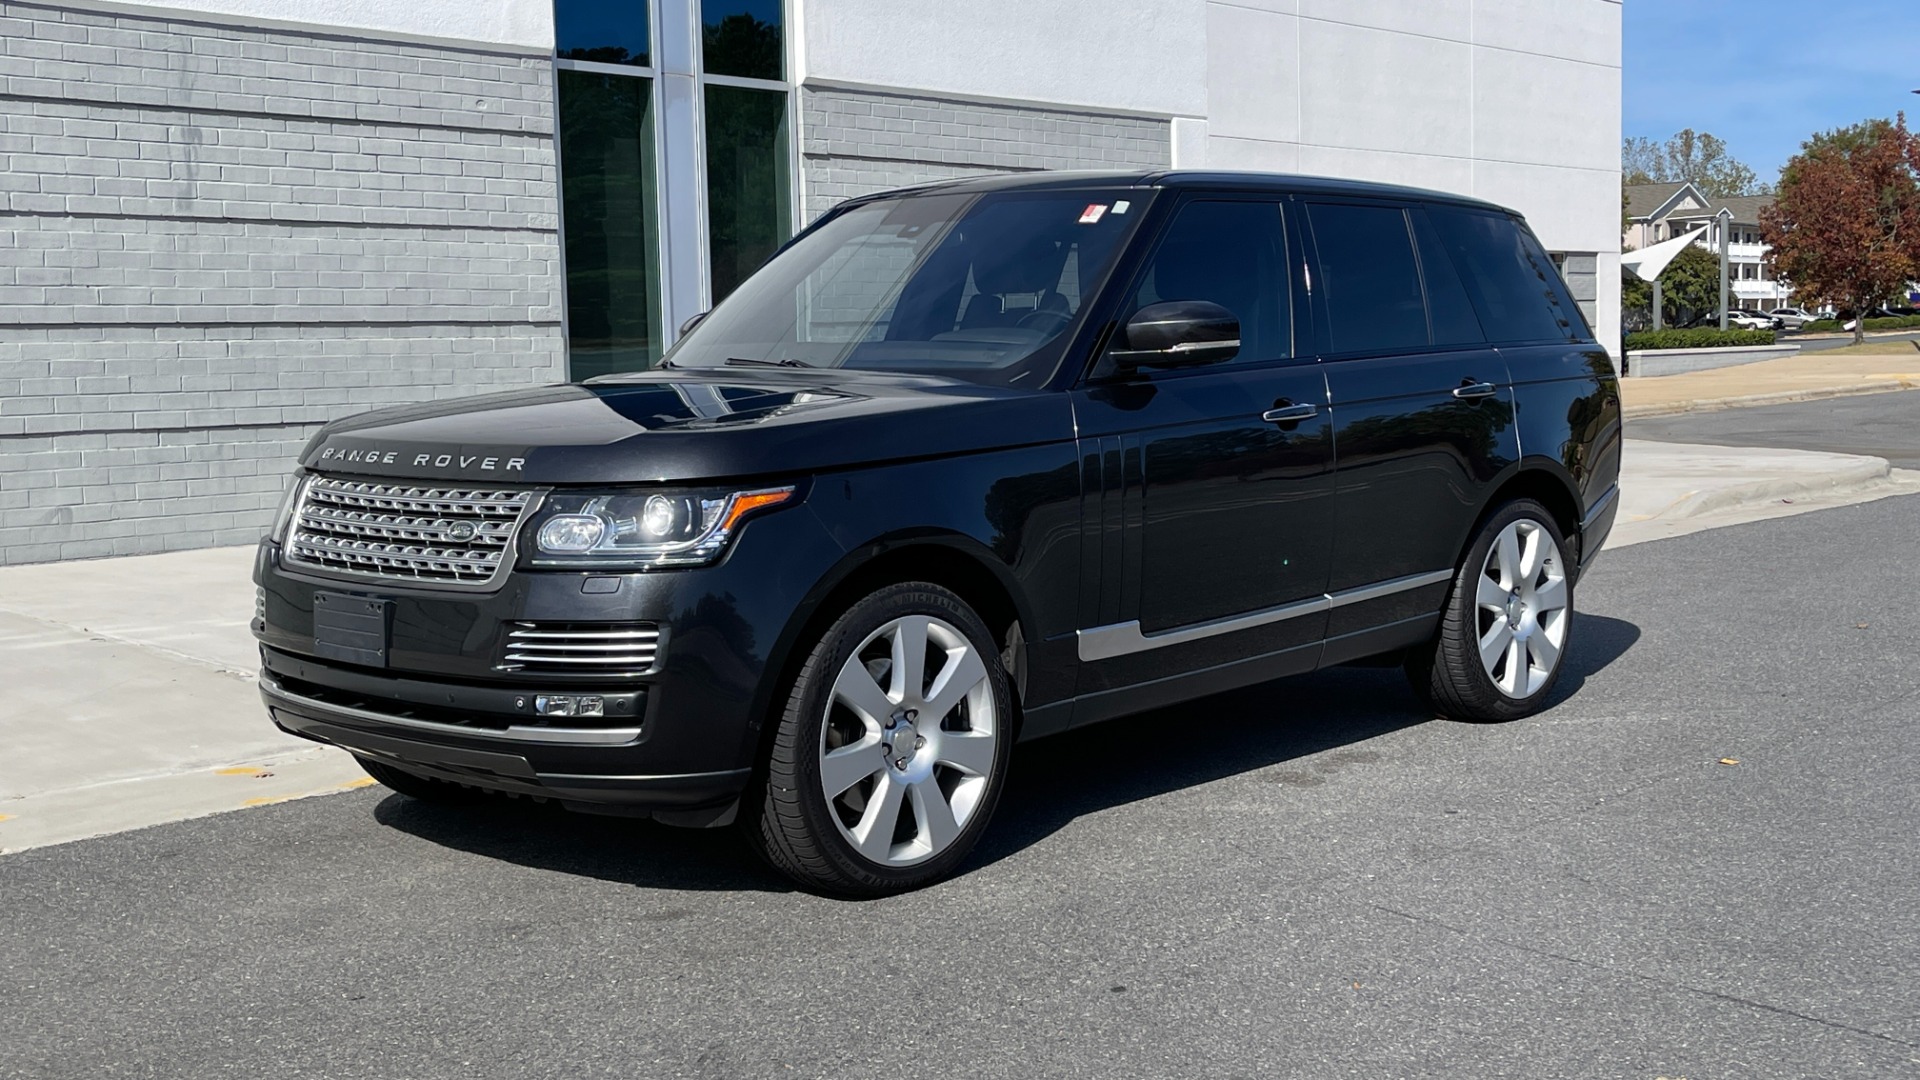 Used 2014 Land Rover Range Rover Supercharged Autobiography / 22IN WHEELS / PREMIUM PAINT / MASSAGE for sale $37,999 at Formula Imports in Charlotte NC 28227 3